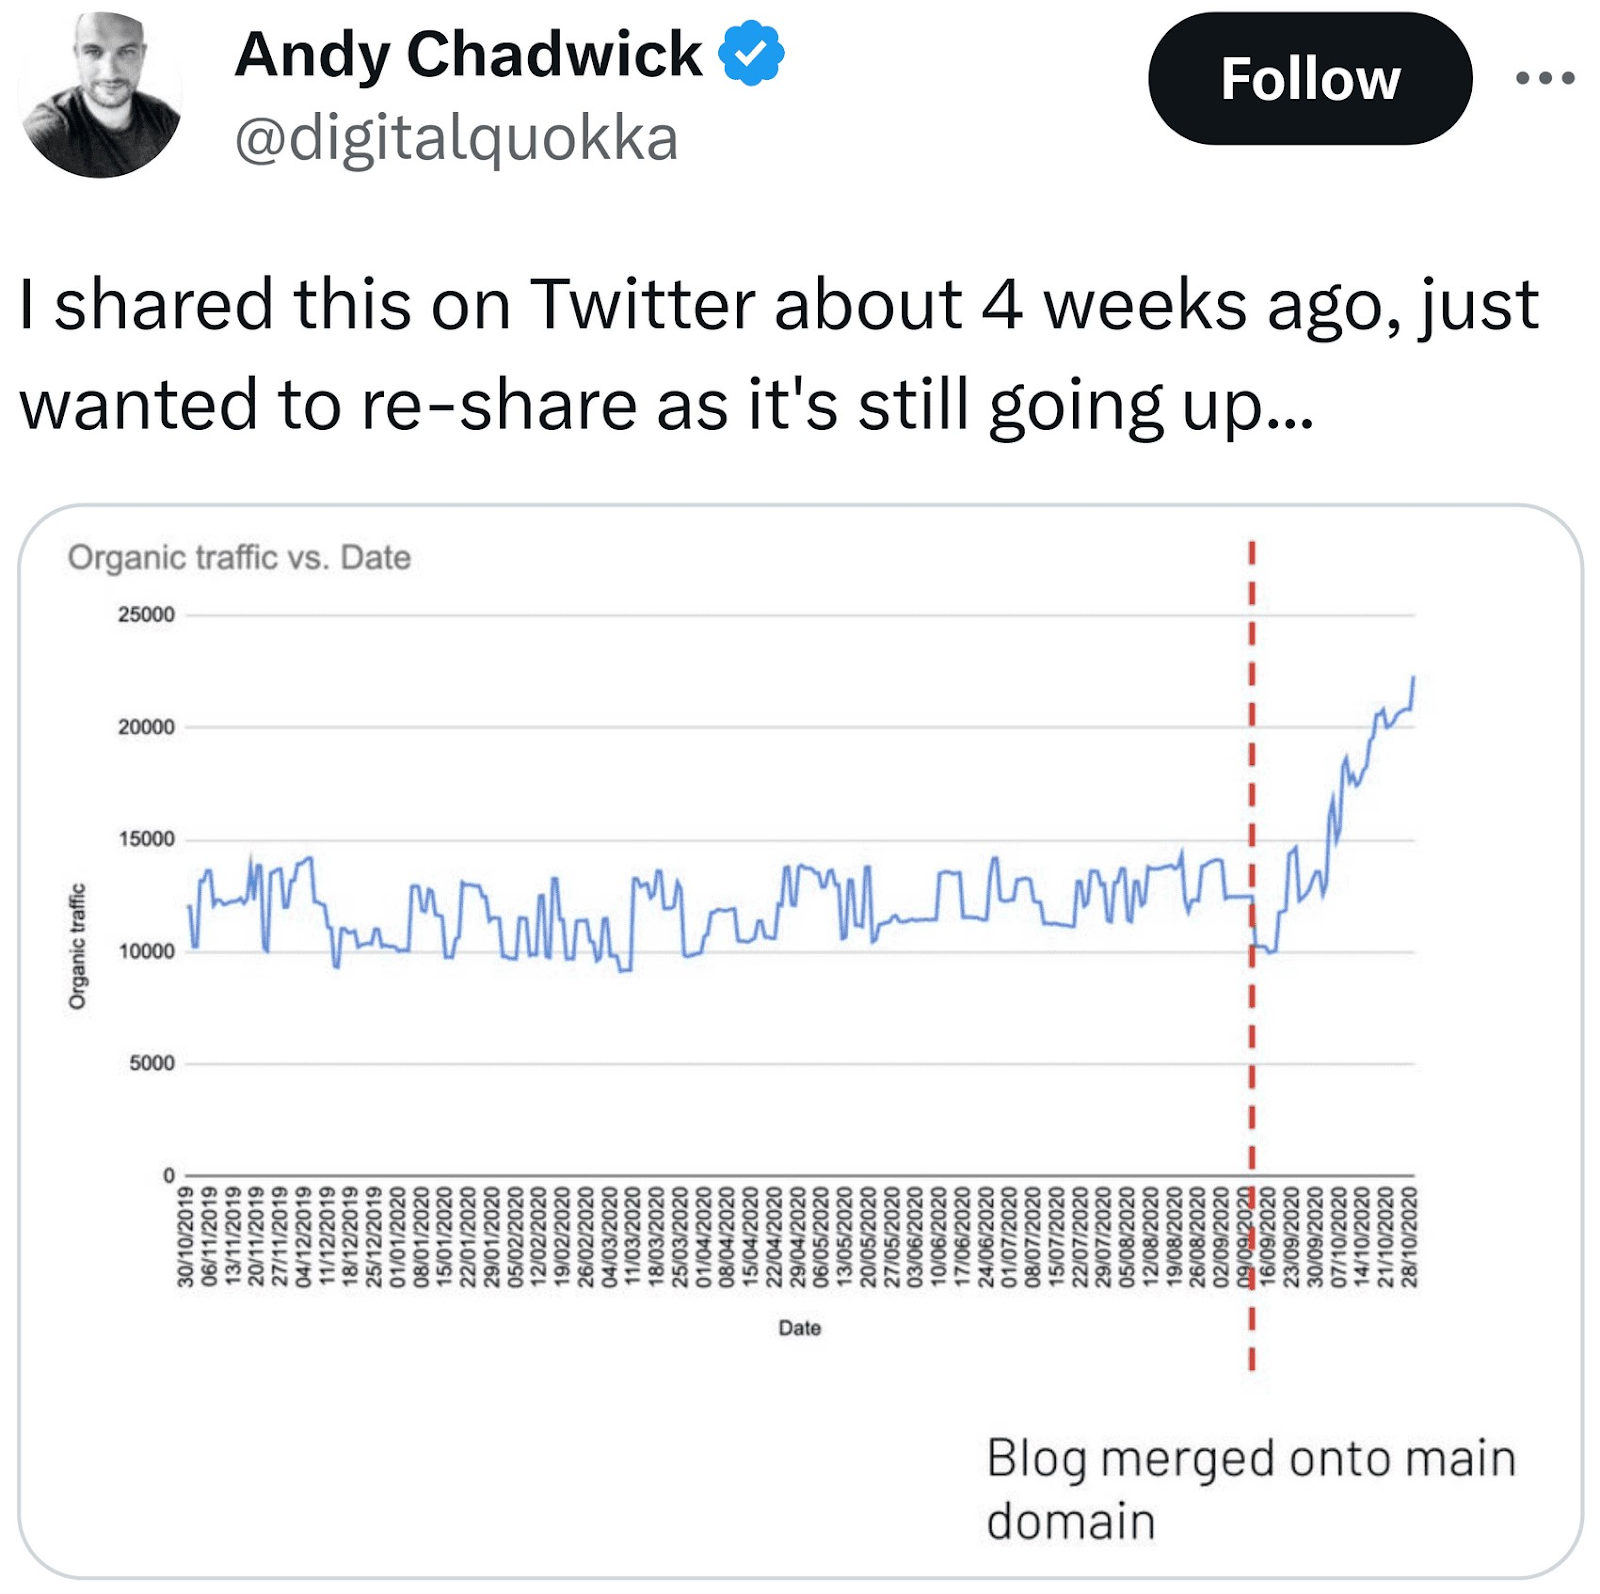 Andy Chadwick's Twitter post about moving his blog to a folder